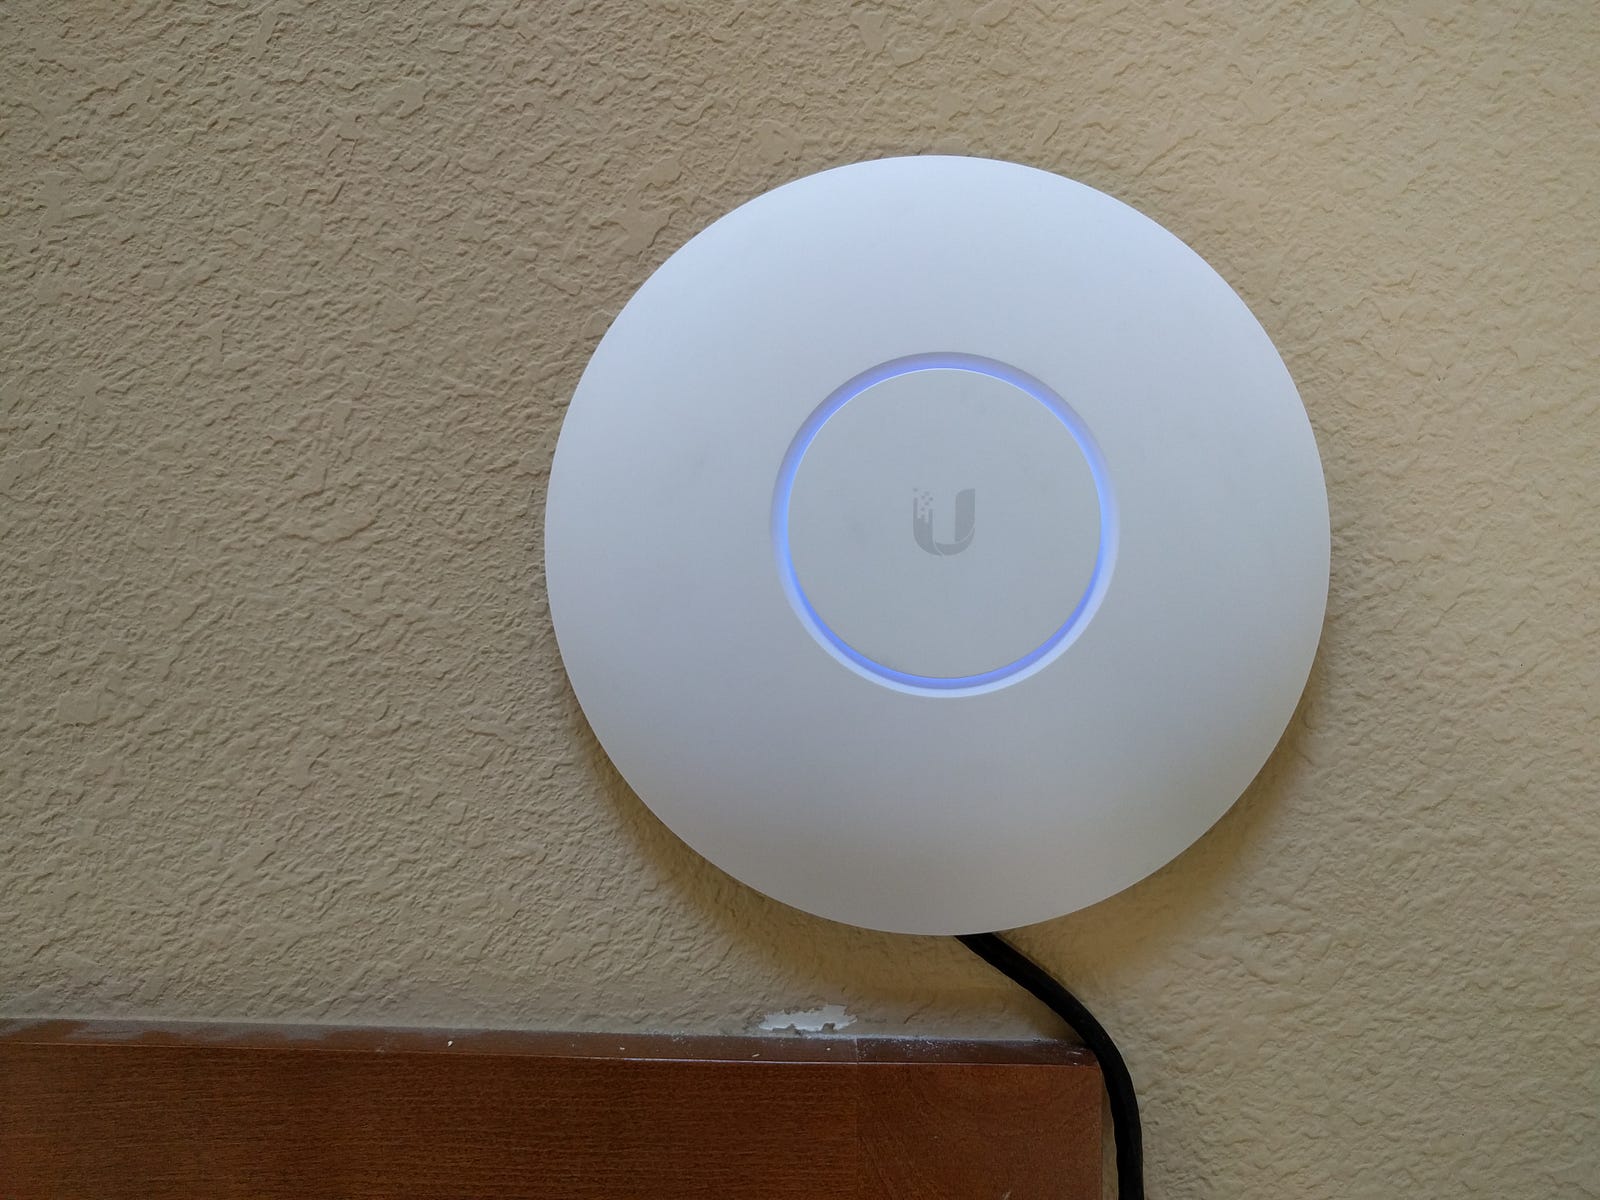 [Network] Getting started with Ubiquiti EdgeRouter Lite + UniFi AP AC Pro